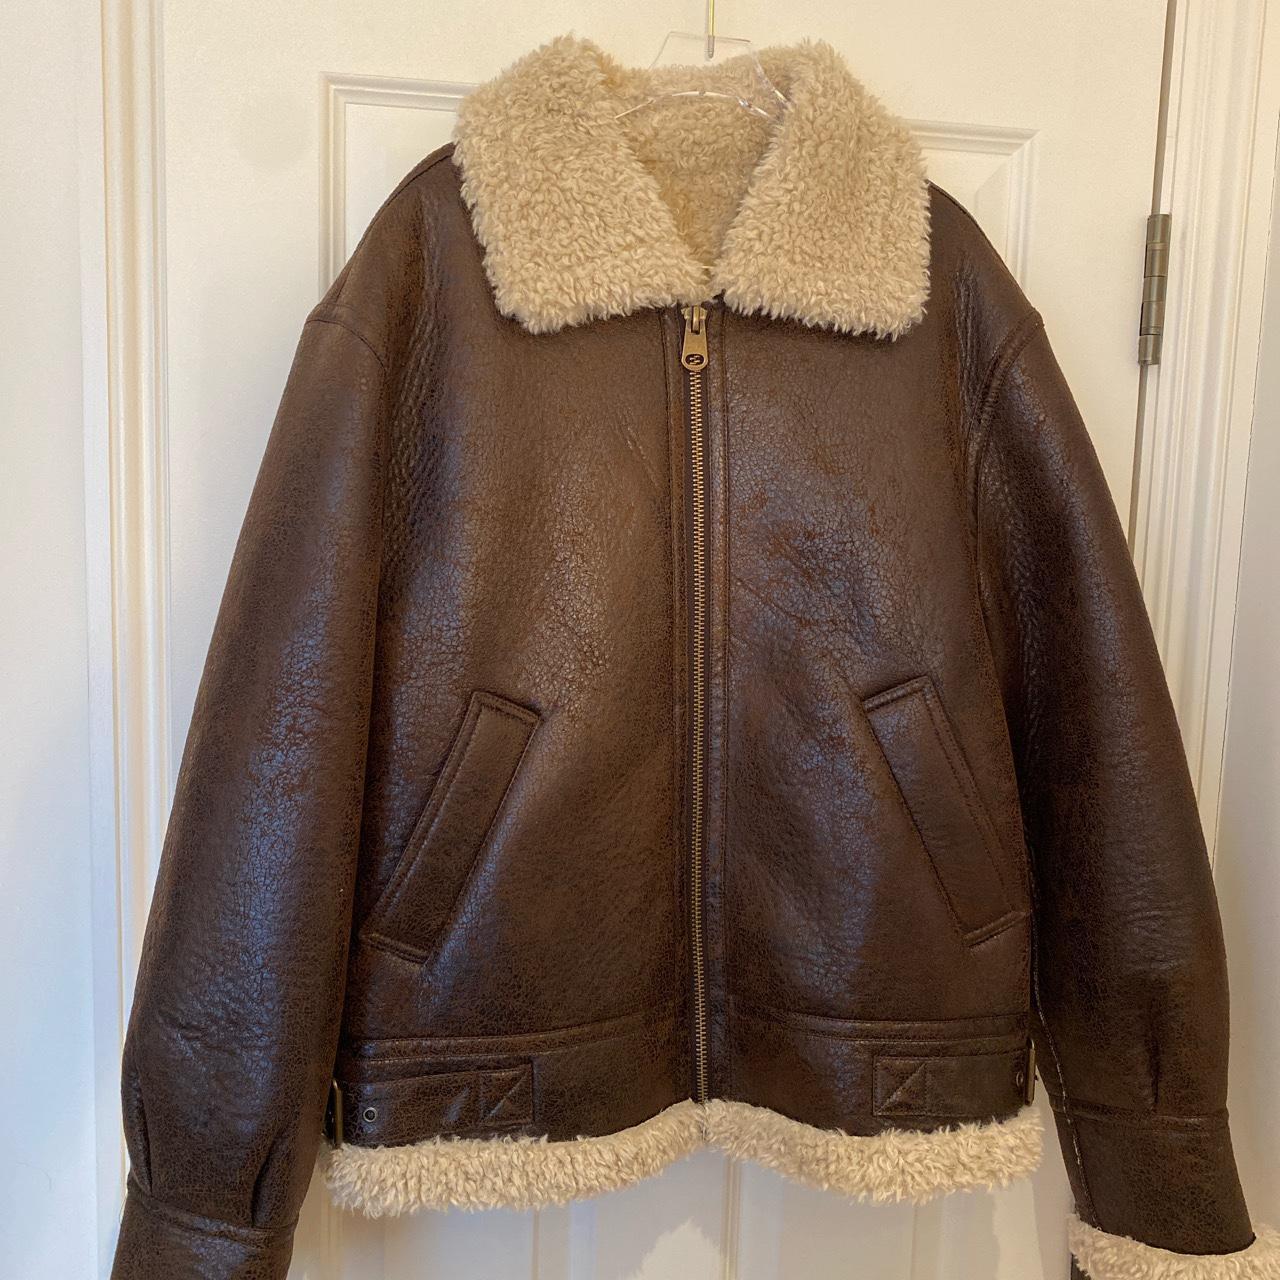 Mango faux leather jacket fully lined. Brand new. No... - Depop